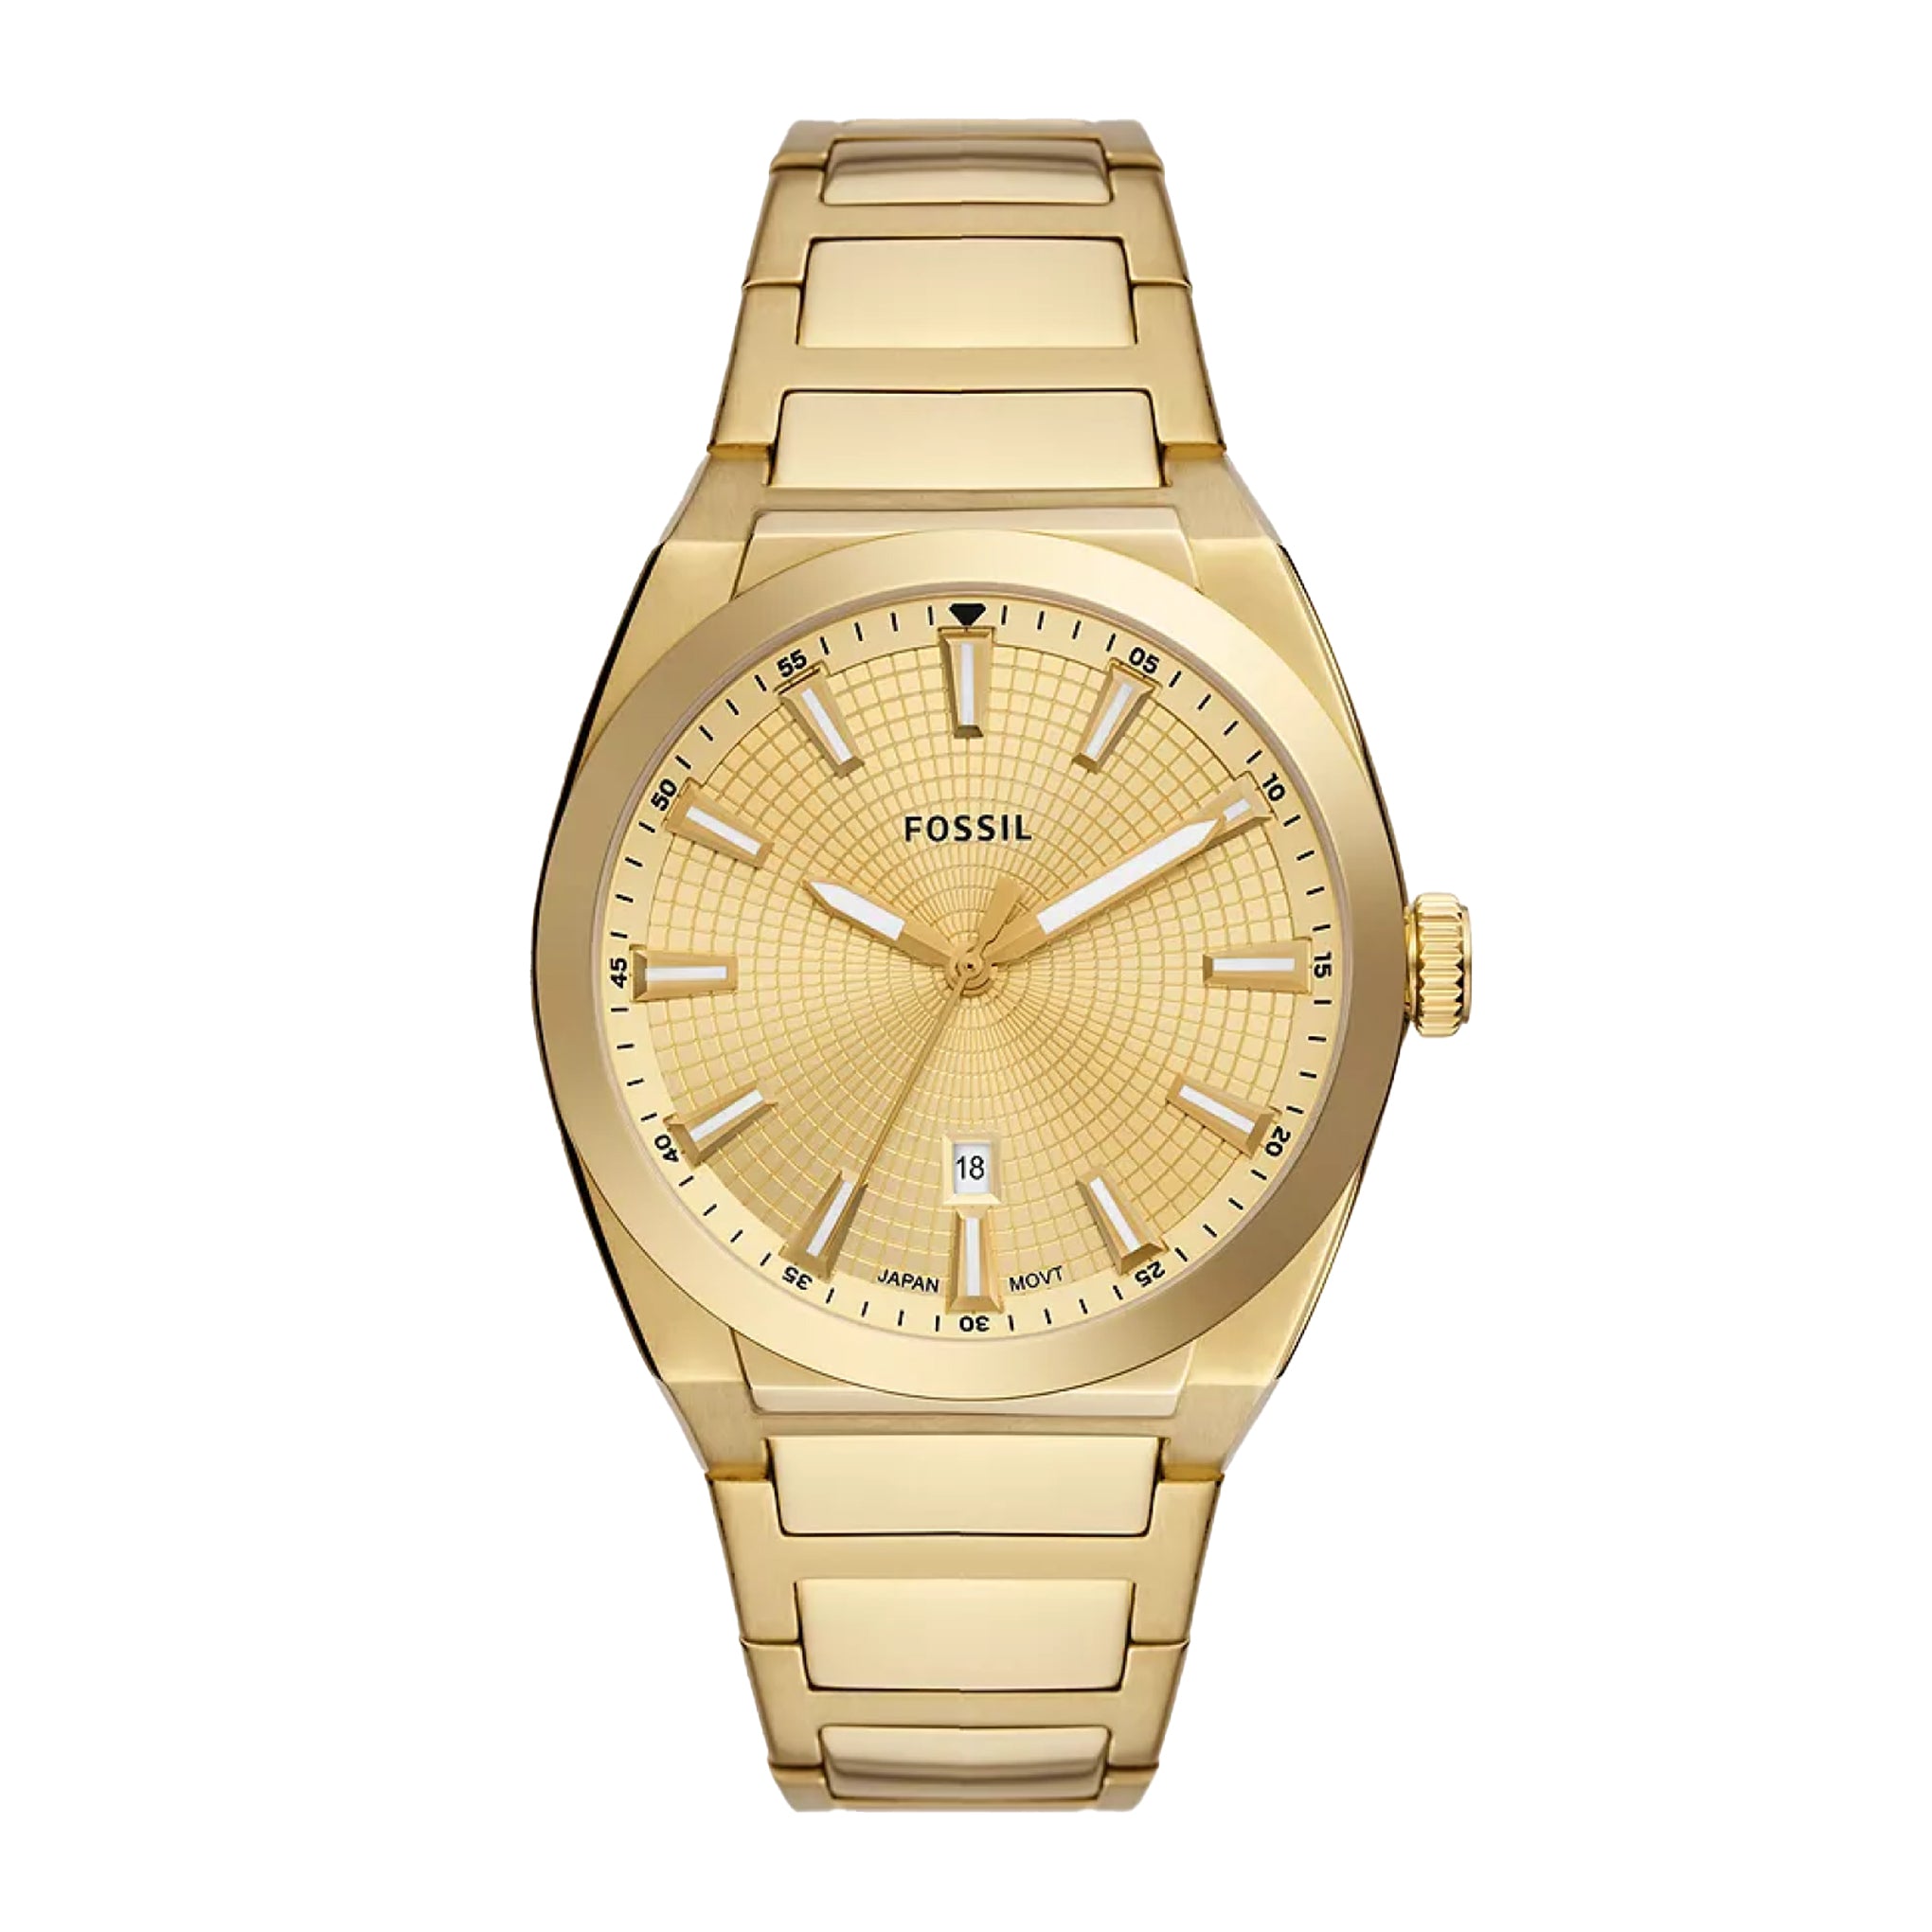 Fossil Men's Everett Three-Hand Date Gold-Tone Stainless Steel Watch F